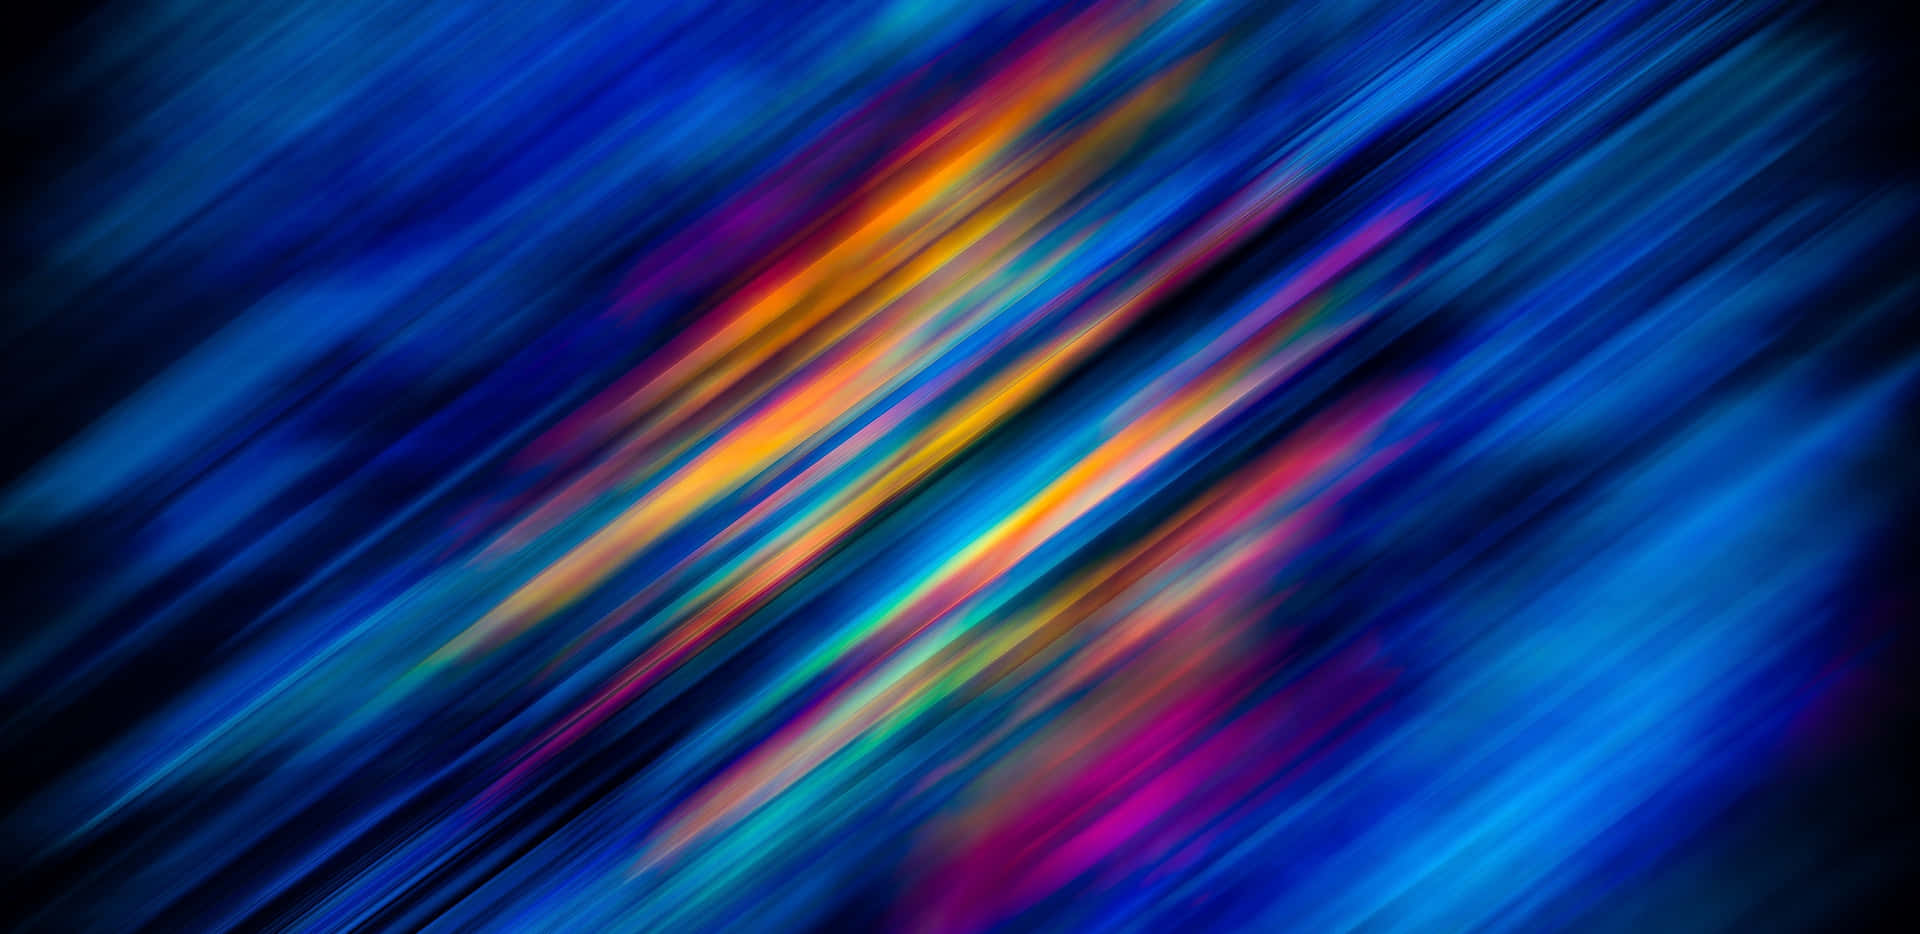 Abstract Blue And Yellow Lines On A Black Background Wallpaper